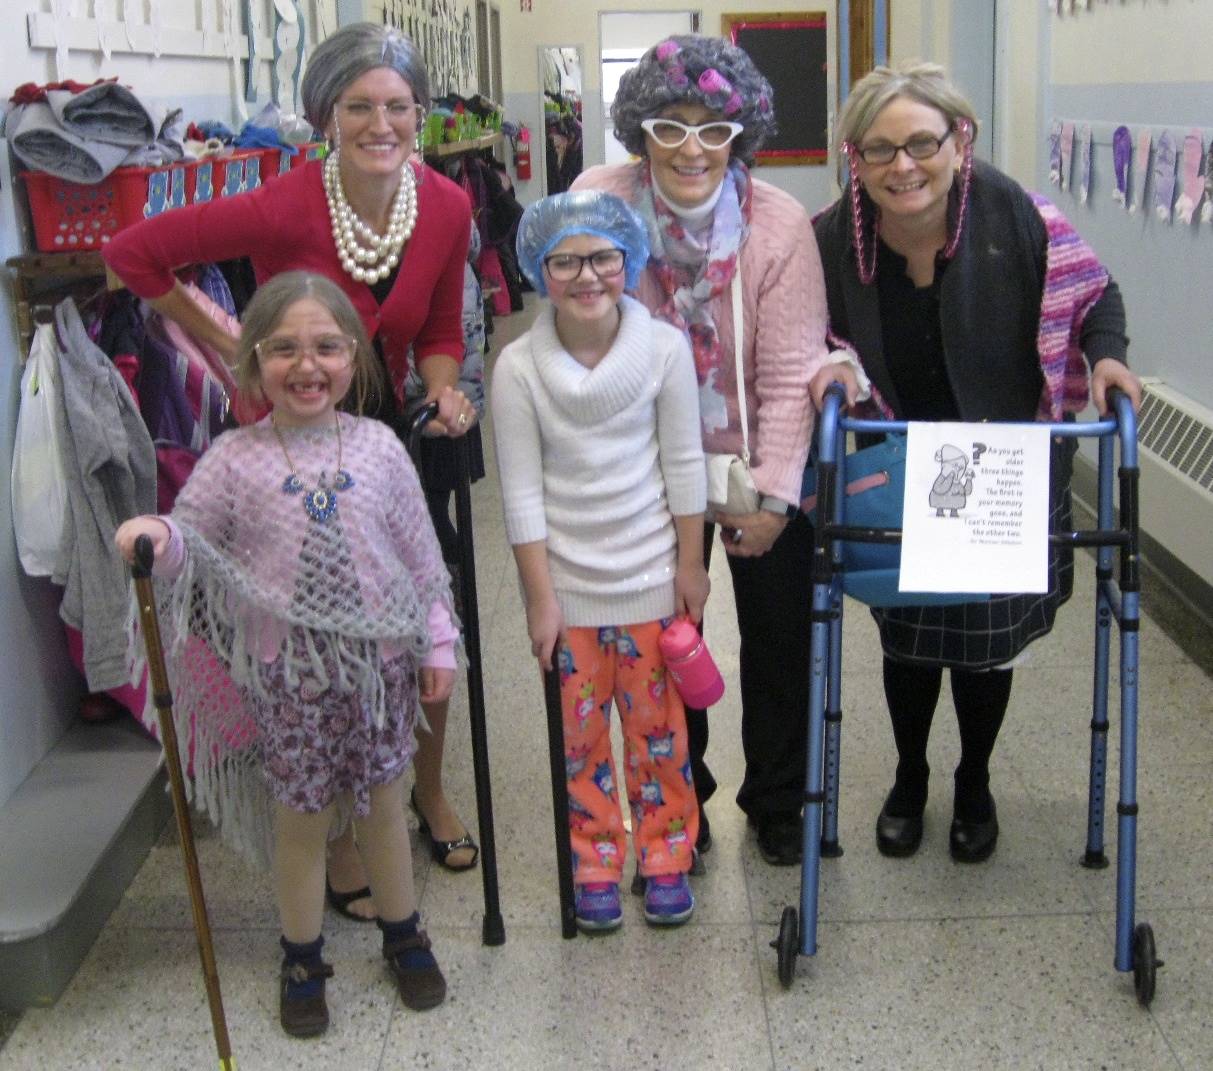 3 teachers and 2 students dressed up as 100 yrs. old.